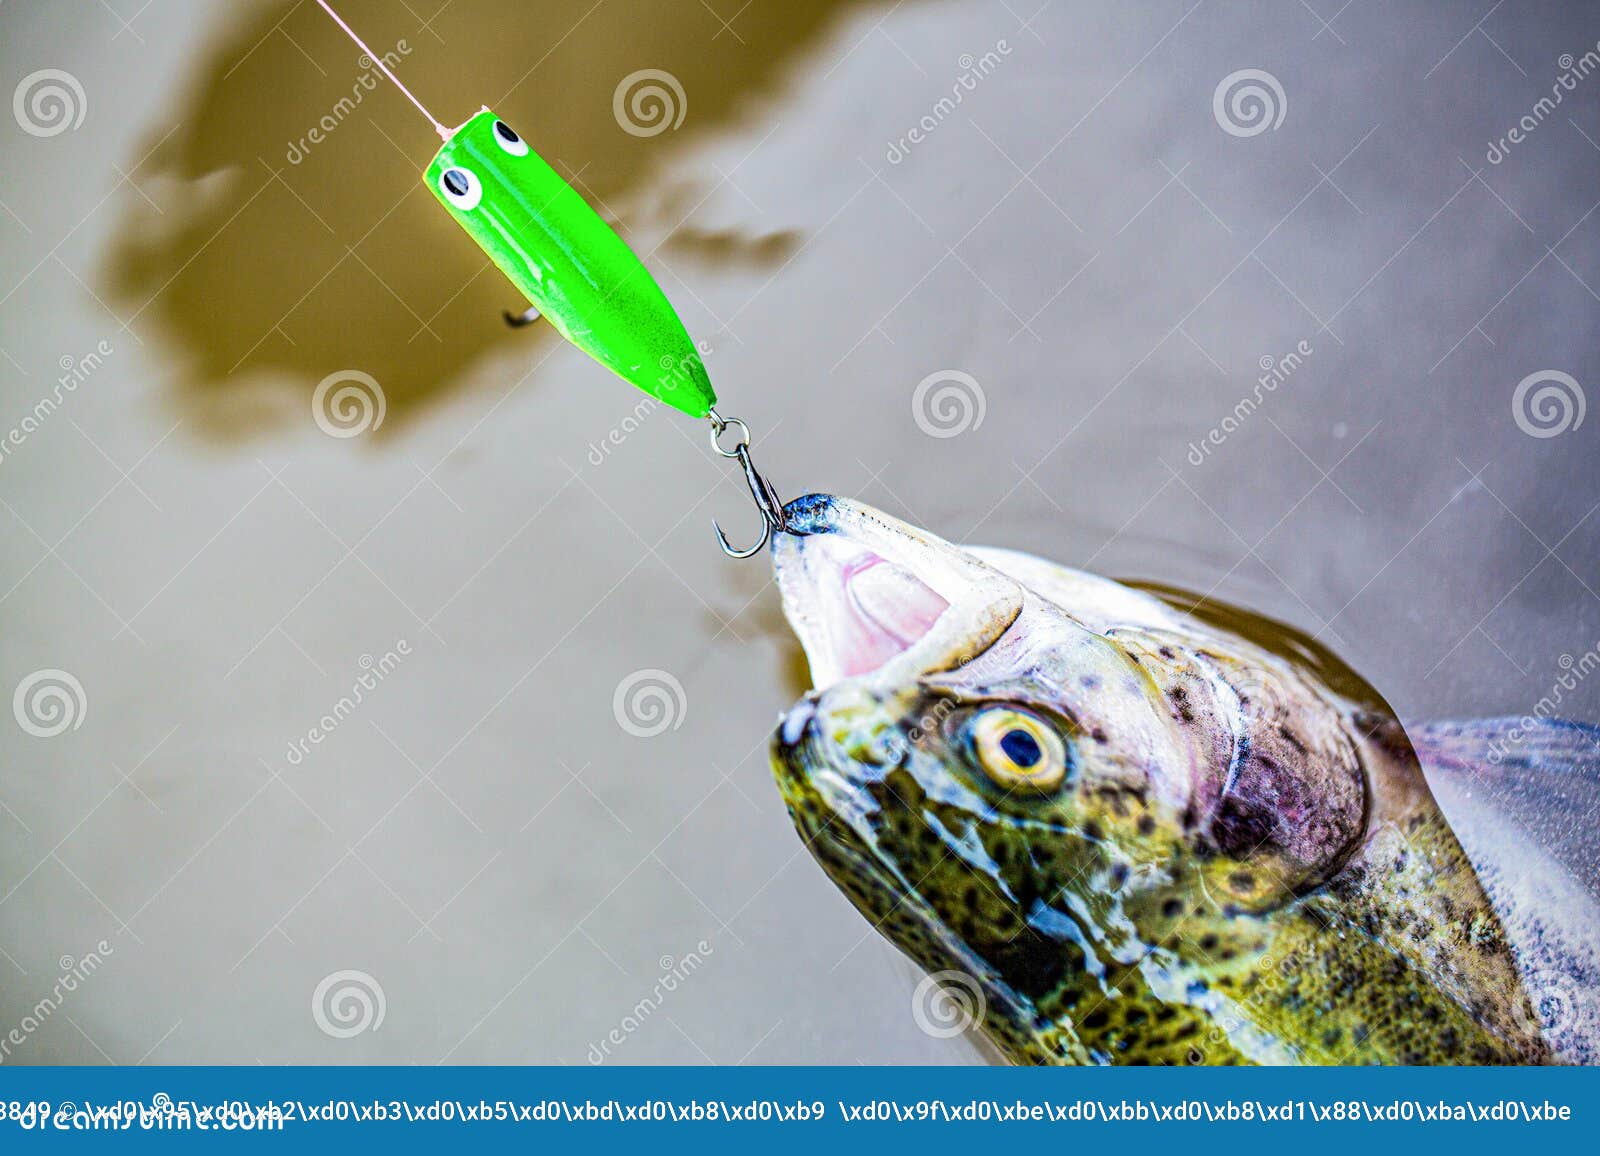 Close-up Shut of a Fish Hook. Fisherman and Trouts. Spinning